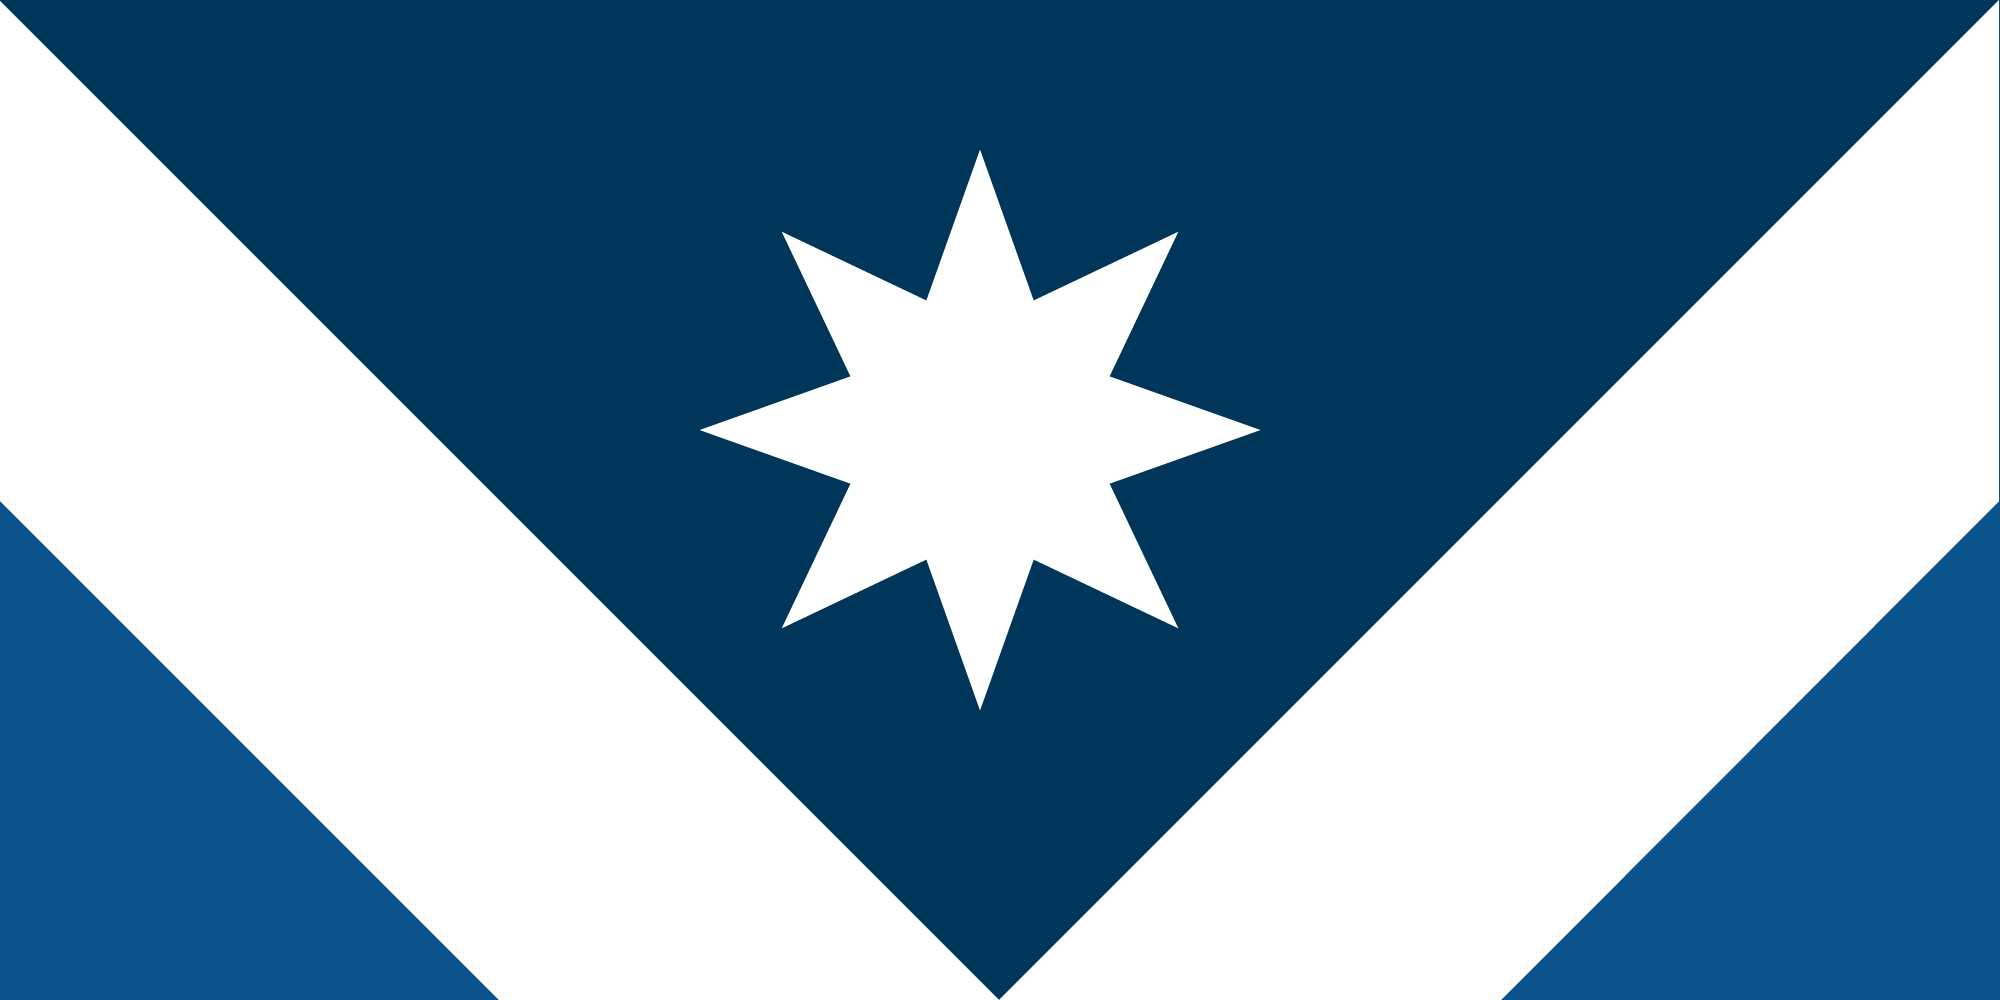 A state flag proposal for VIC